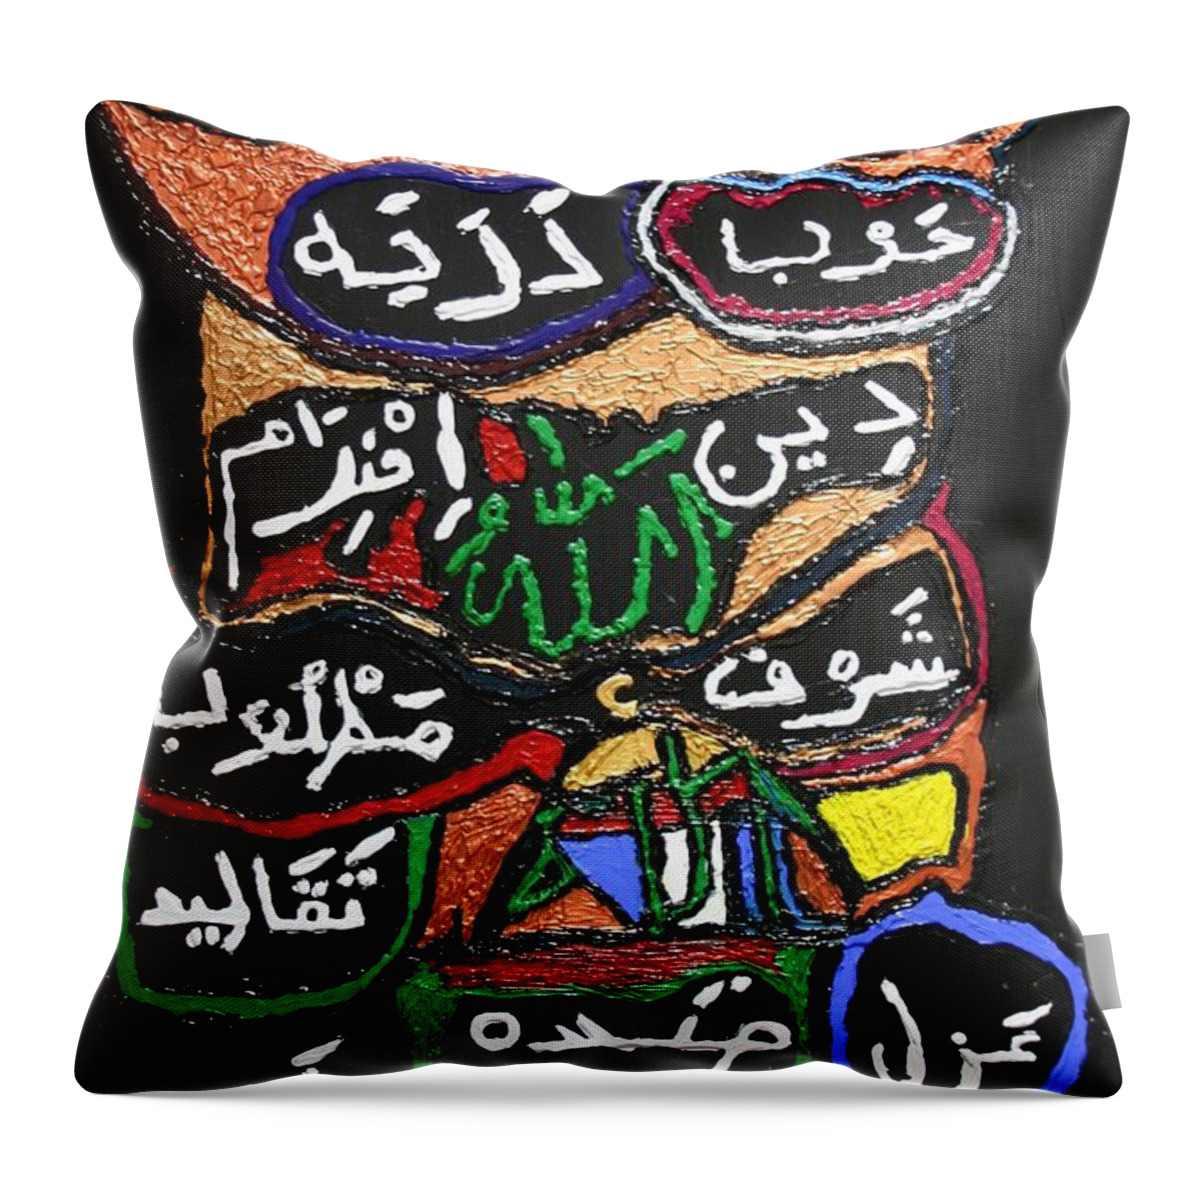 Multicultural Nfprsa Product Review Reviews Marco Social Media Technology Websites \\in-d�lj\\ Darrell Black Definism Artwork Throw Pillow featuring the mixed media The path to Sanctity by Darrell Black